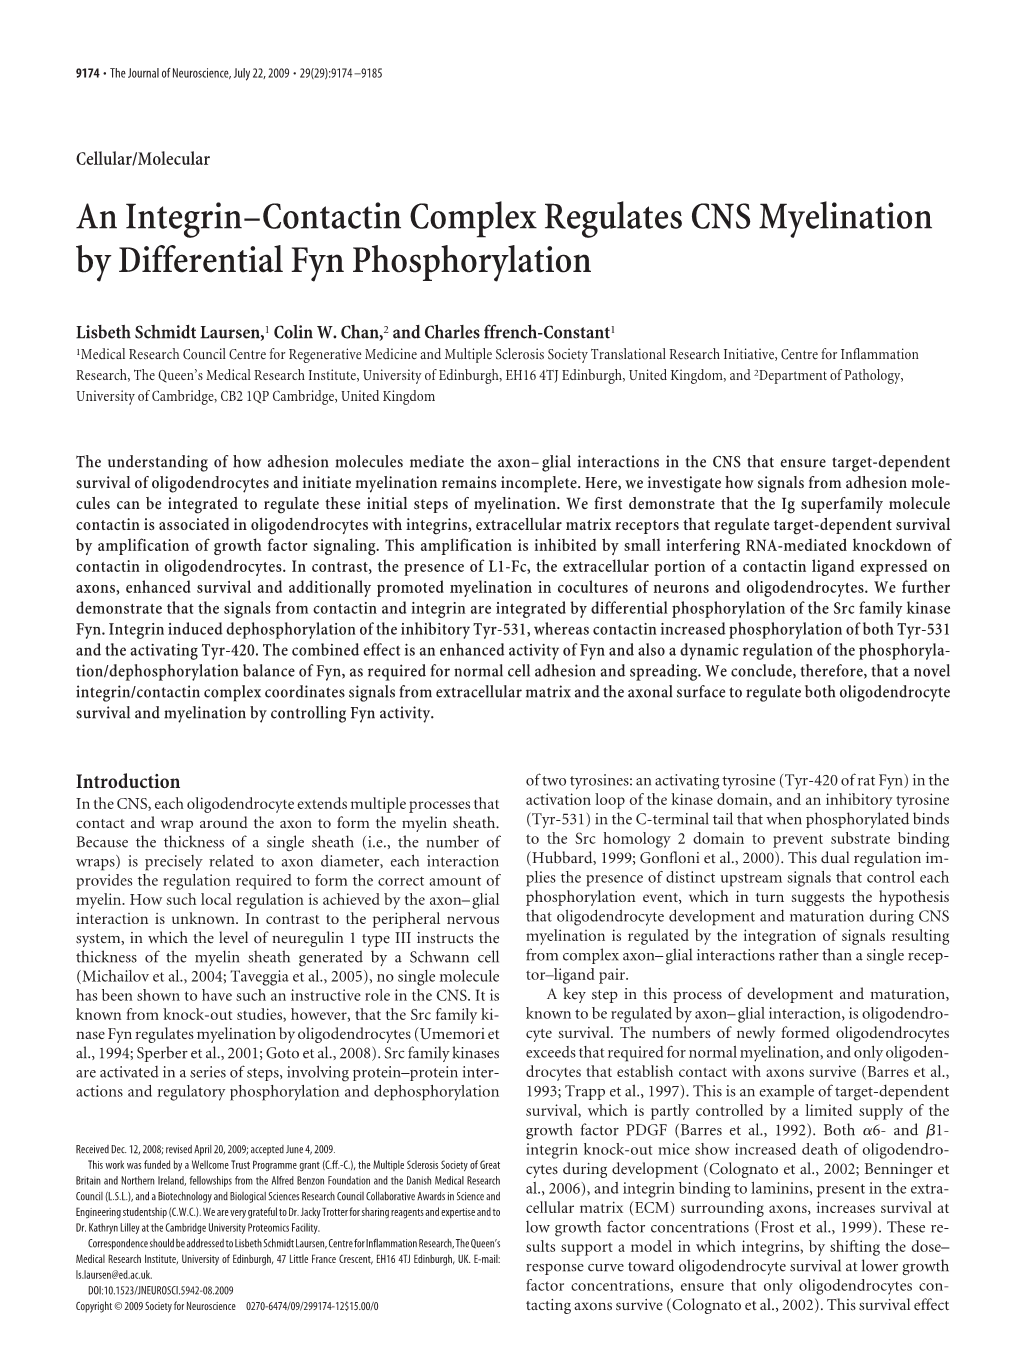 An Integrin–Contactin Complex Regulates CNS Myelination by Differential Fyn Phosphorylation